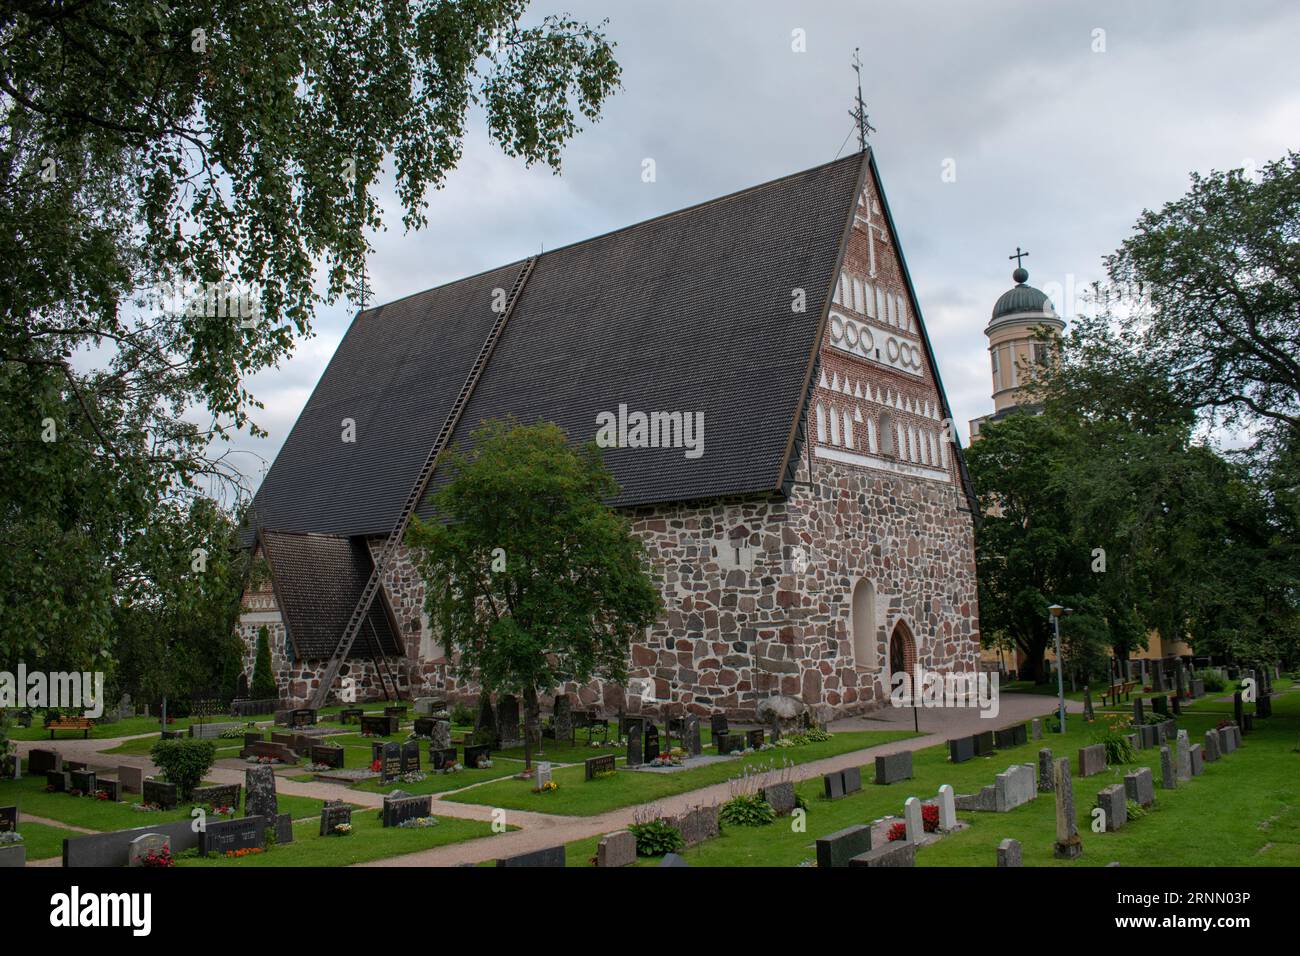 Medieval greystone Church of St. Mary in Hollola (Finnish: Hollolan kirkko), Finland. The church was built between the years 1495-1510. One of the 86 Stock Photo